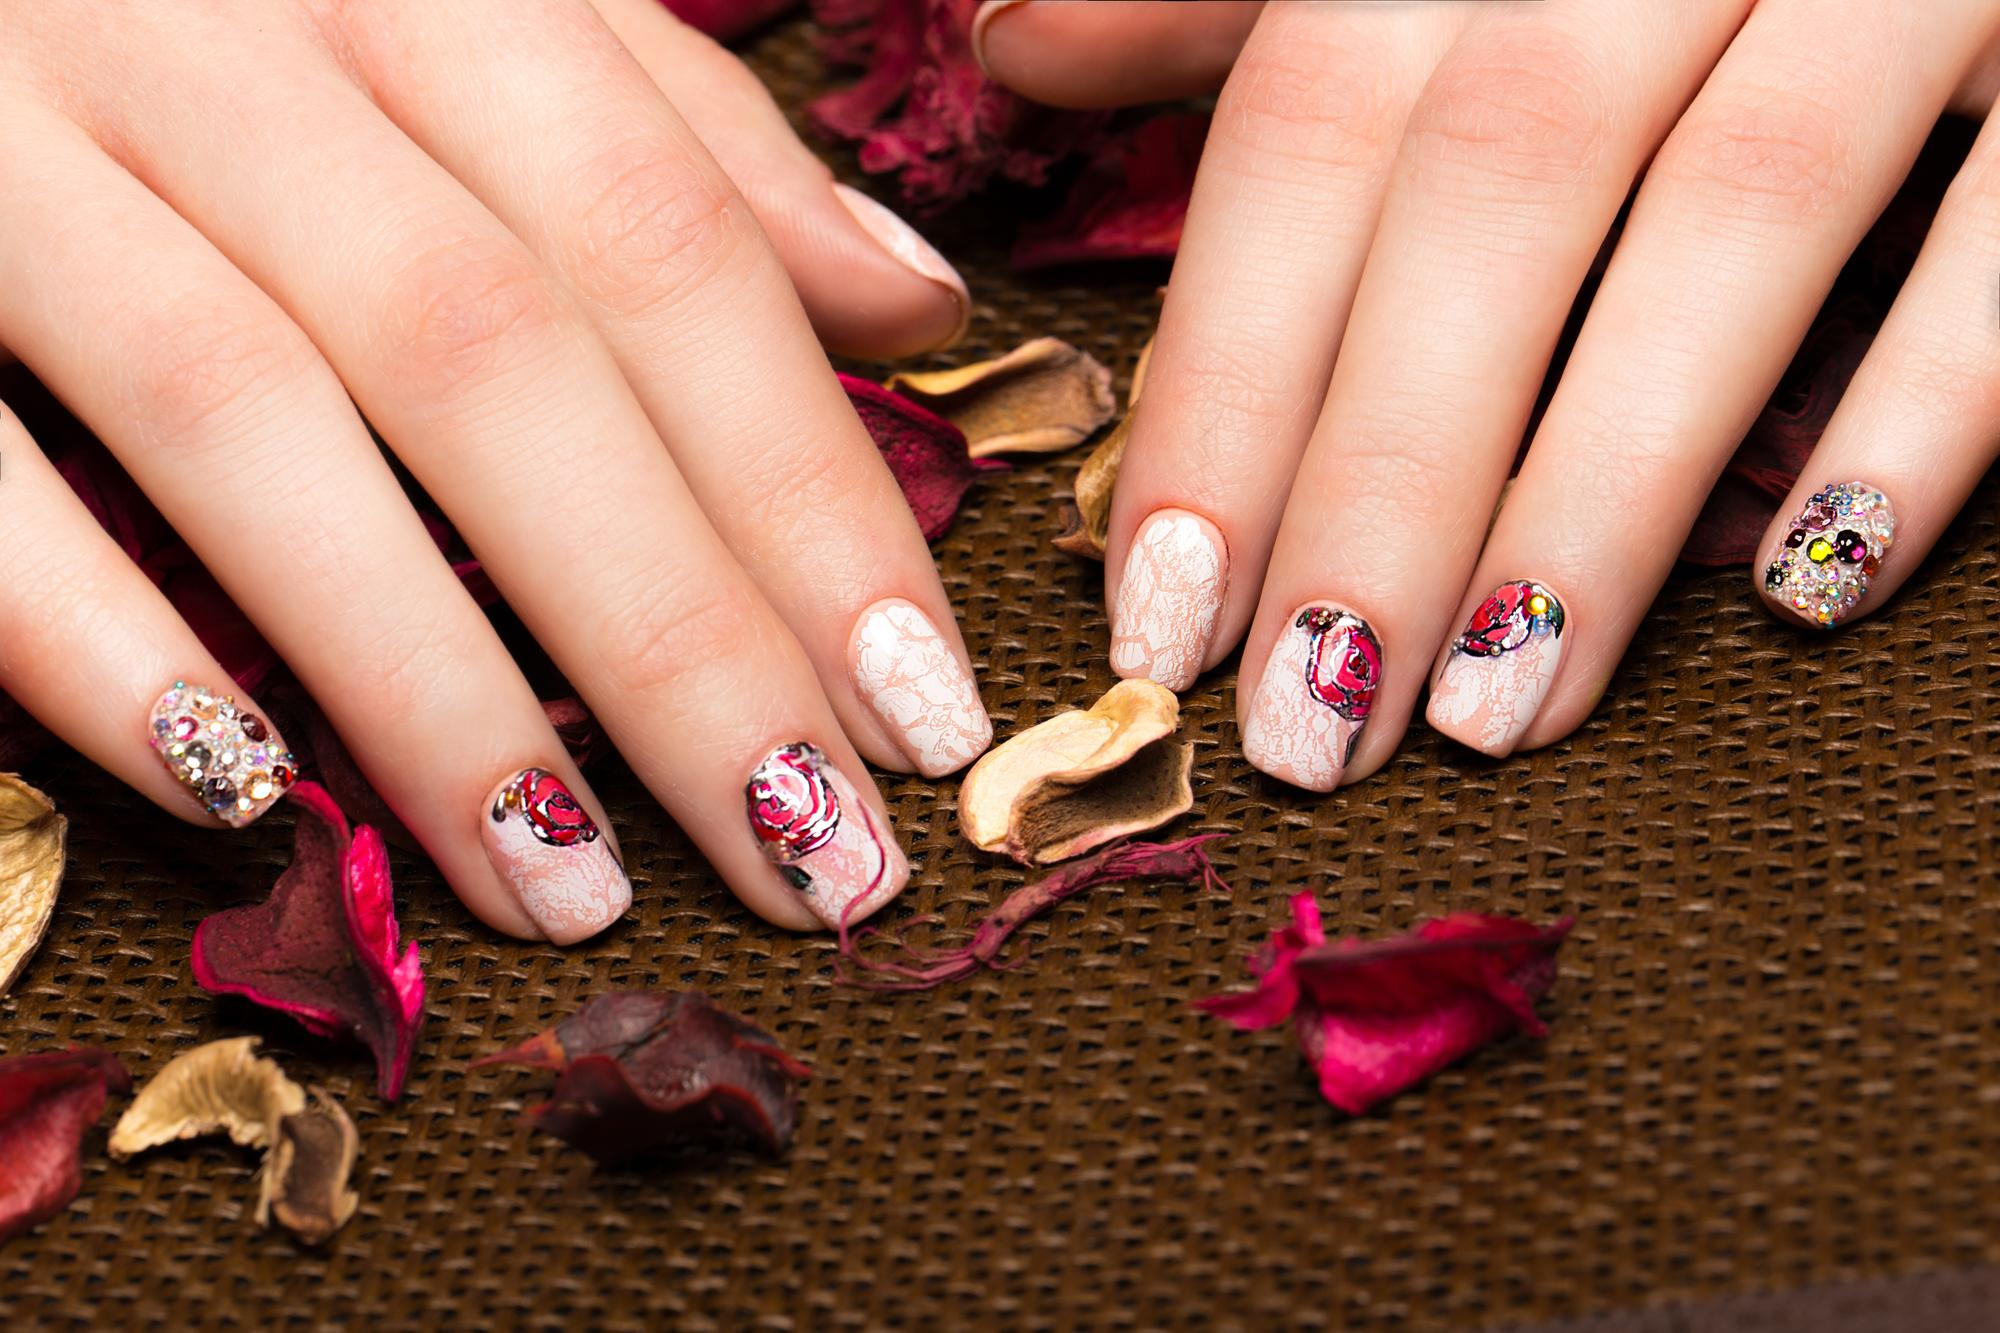 beautiful-manicure-with-flowers-female-fingers-nails-design-closeup-picture-taken-studio-white-background